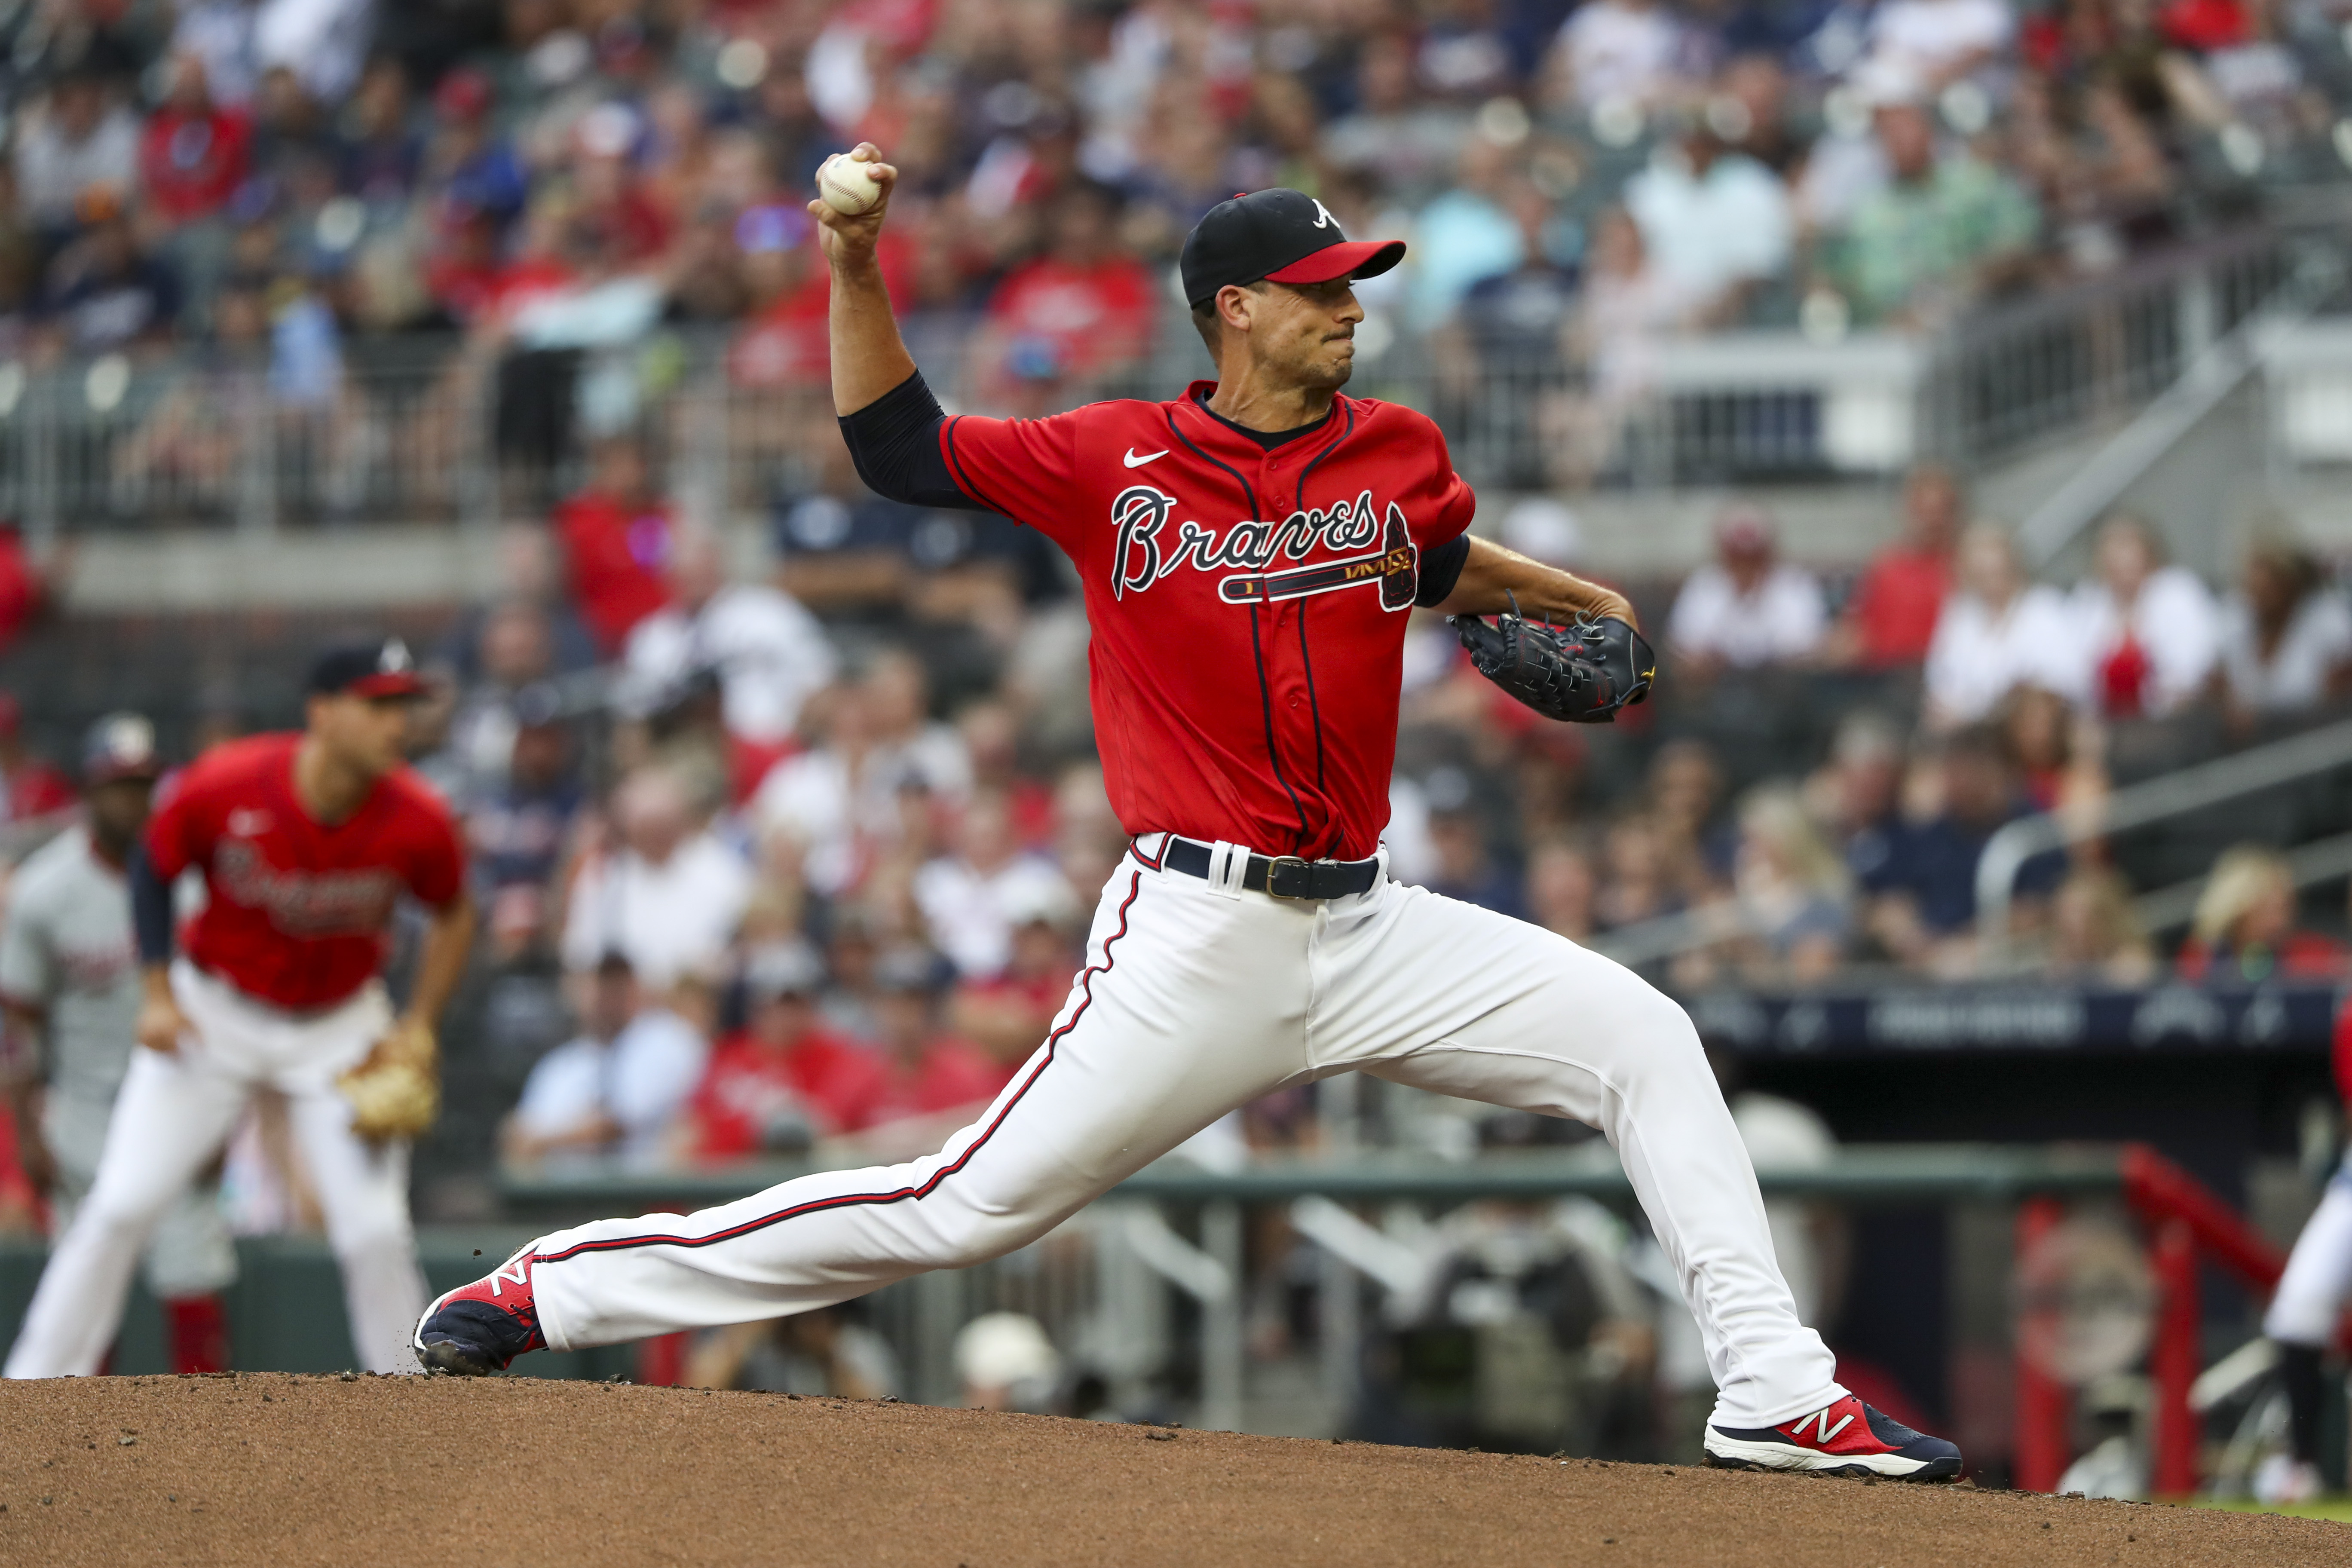 Michael Harris, Charlie Morton star in Braves' win over Nationals